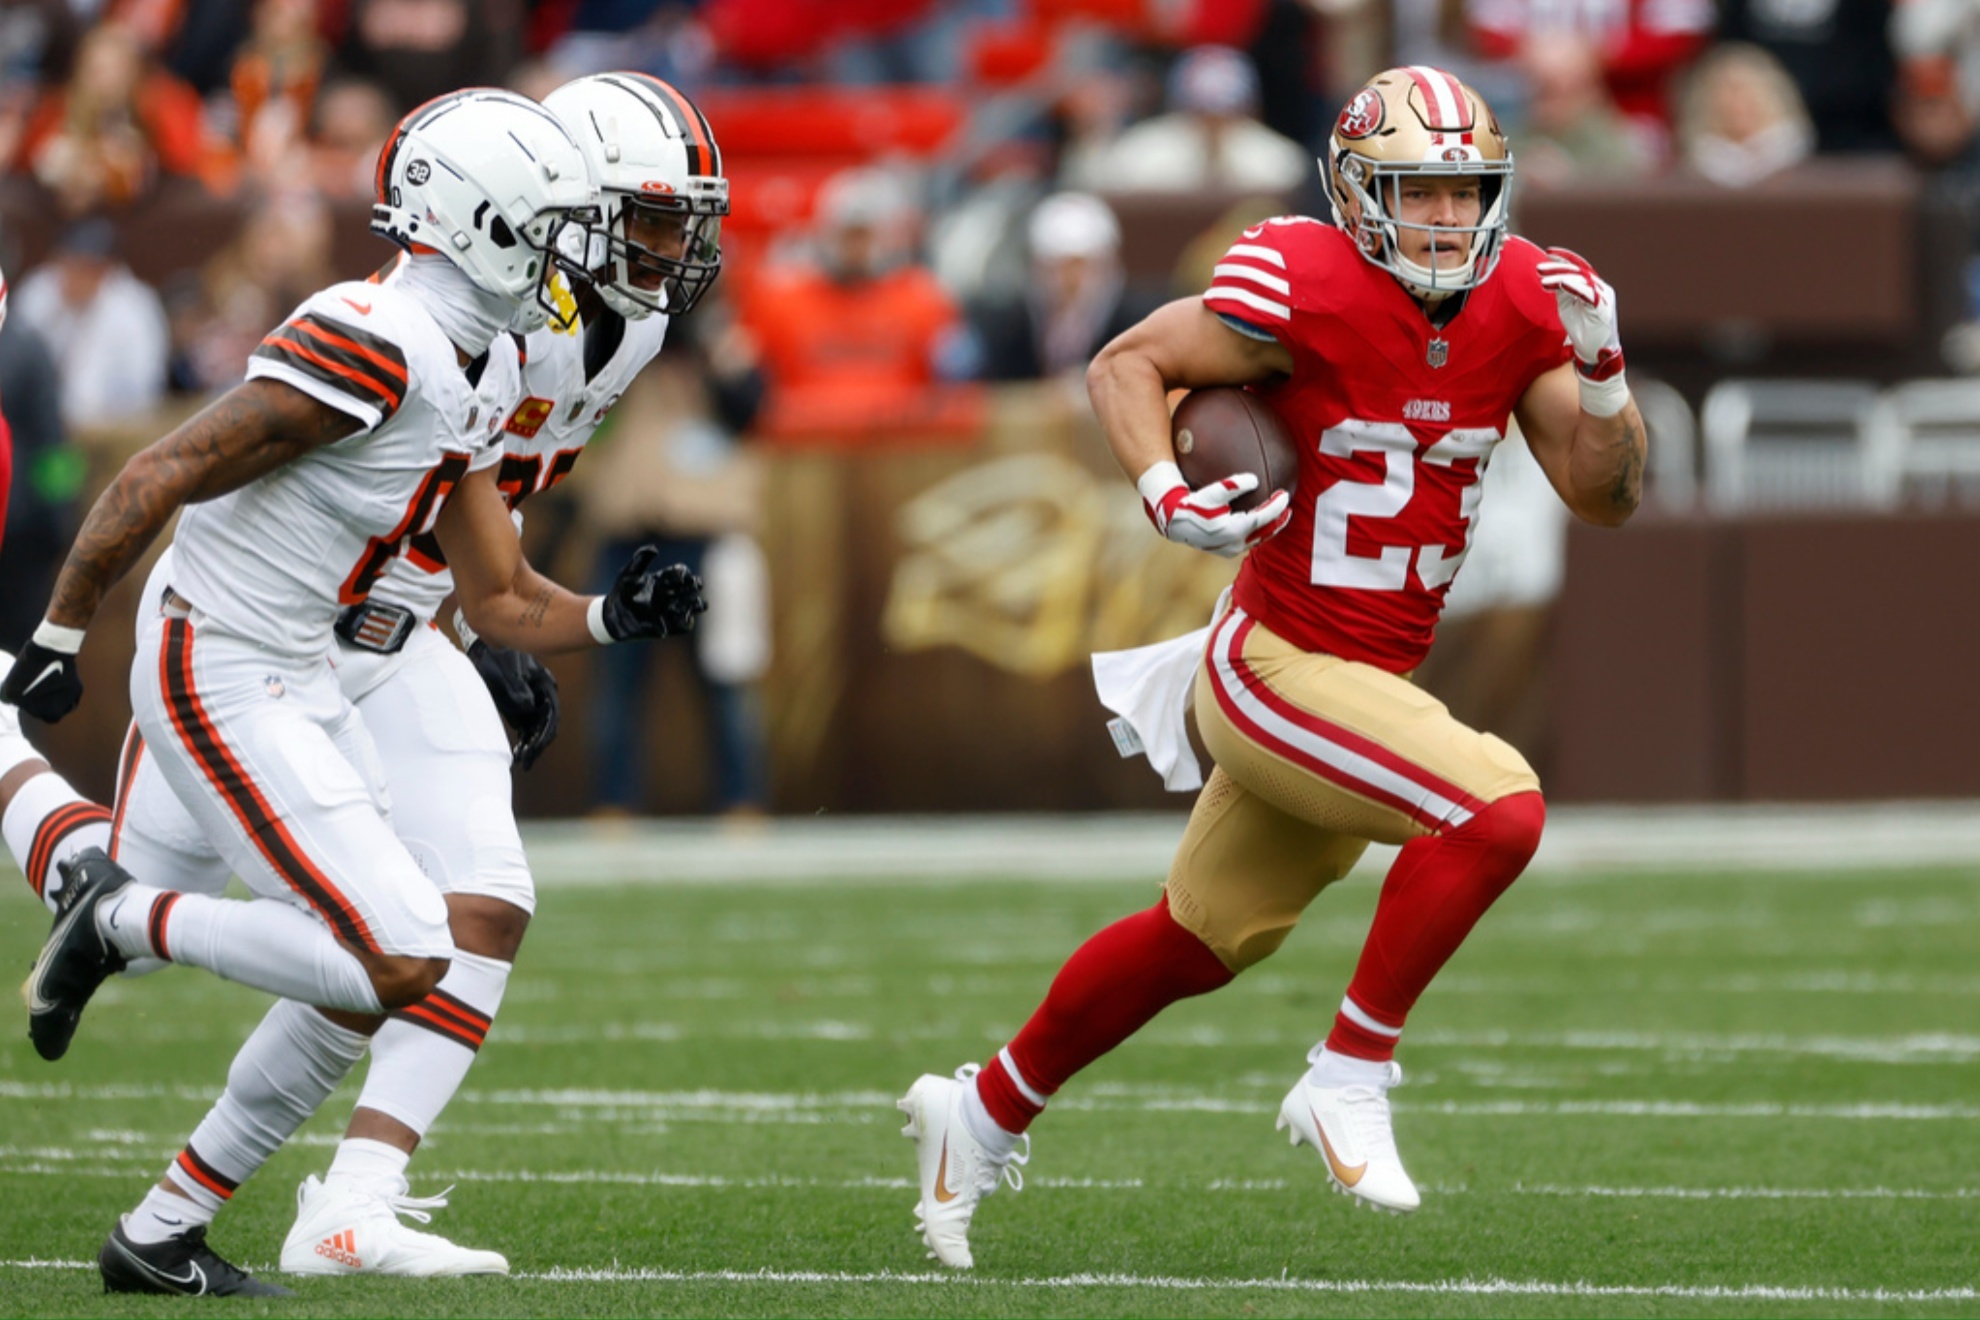 49ers' McCaffrey out due to injury against Browns.